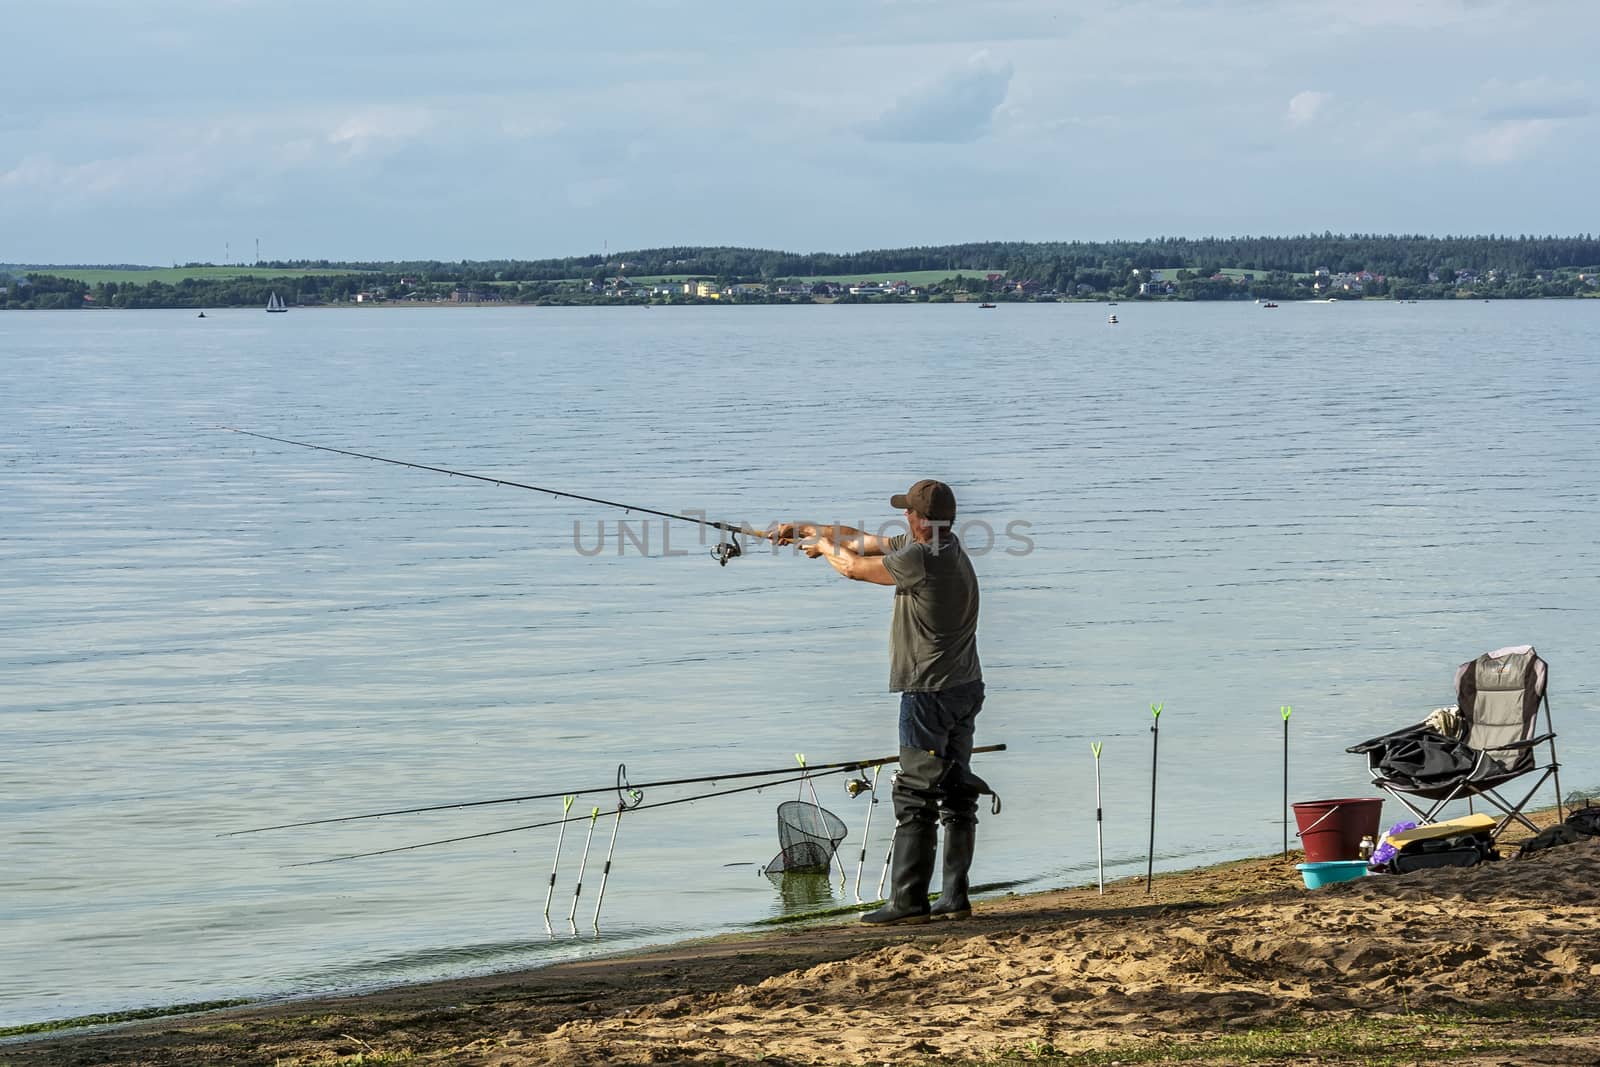 On the shore of the lake, a man installed fishing rods for fishing